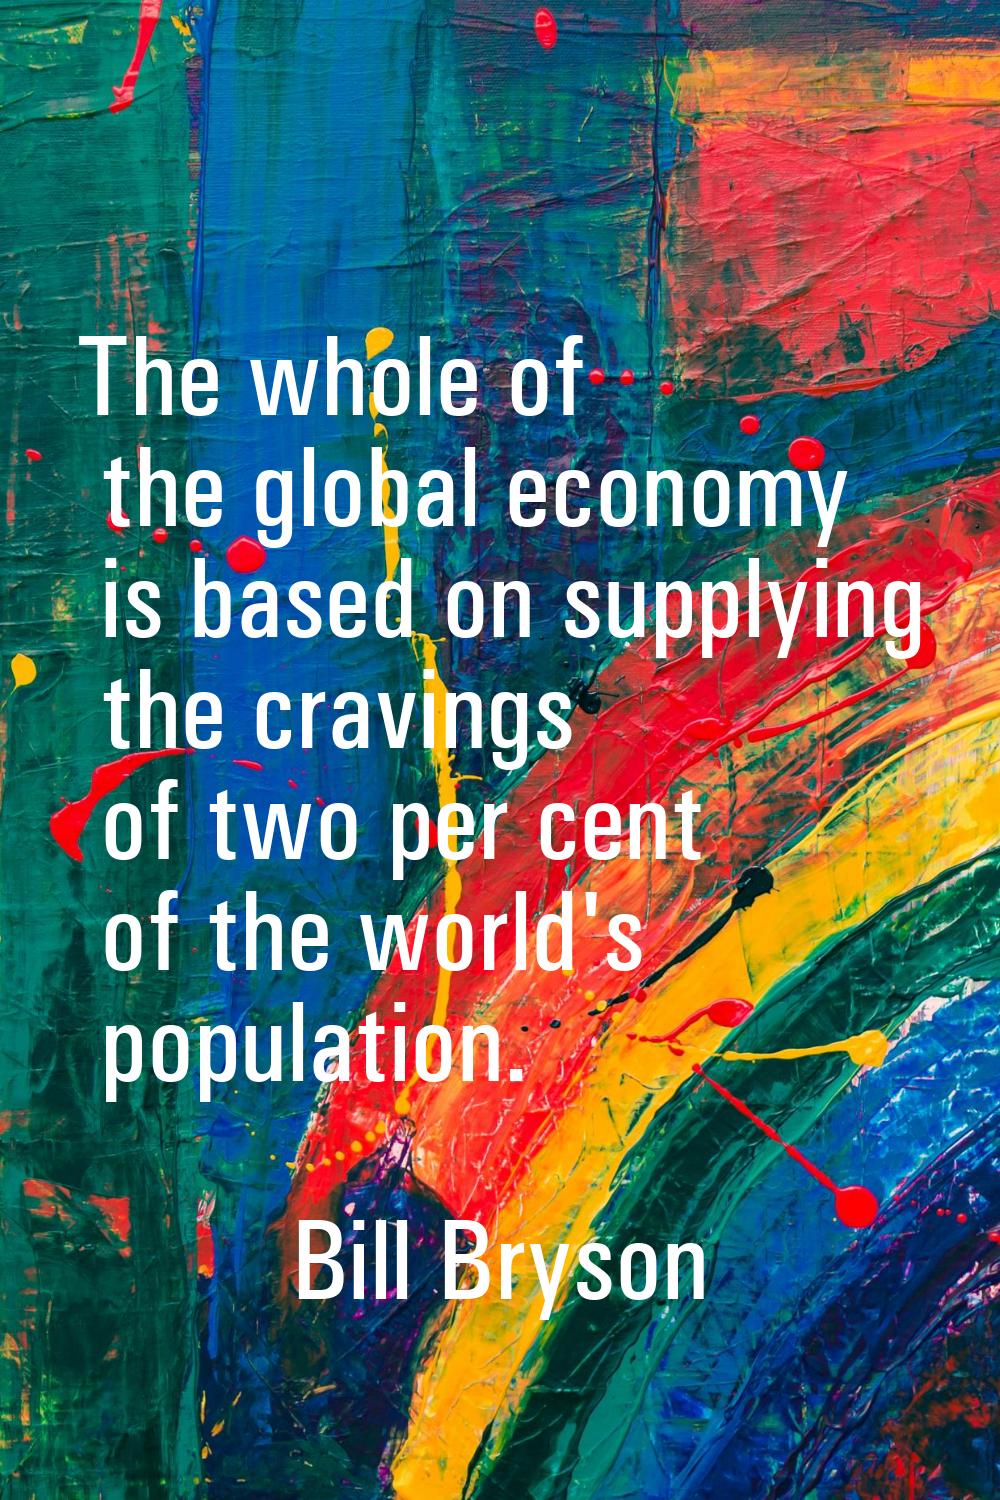 The whole of the global economy is based on supplying the cravings of two per cent of the world's p